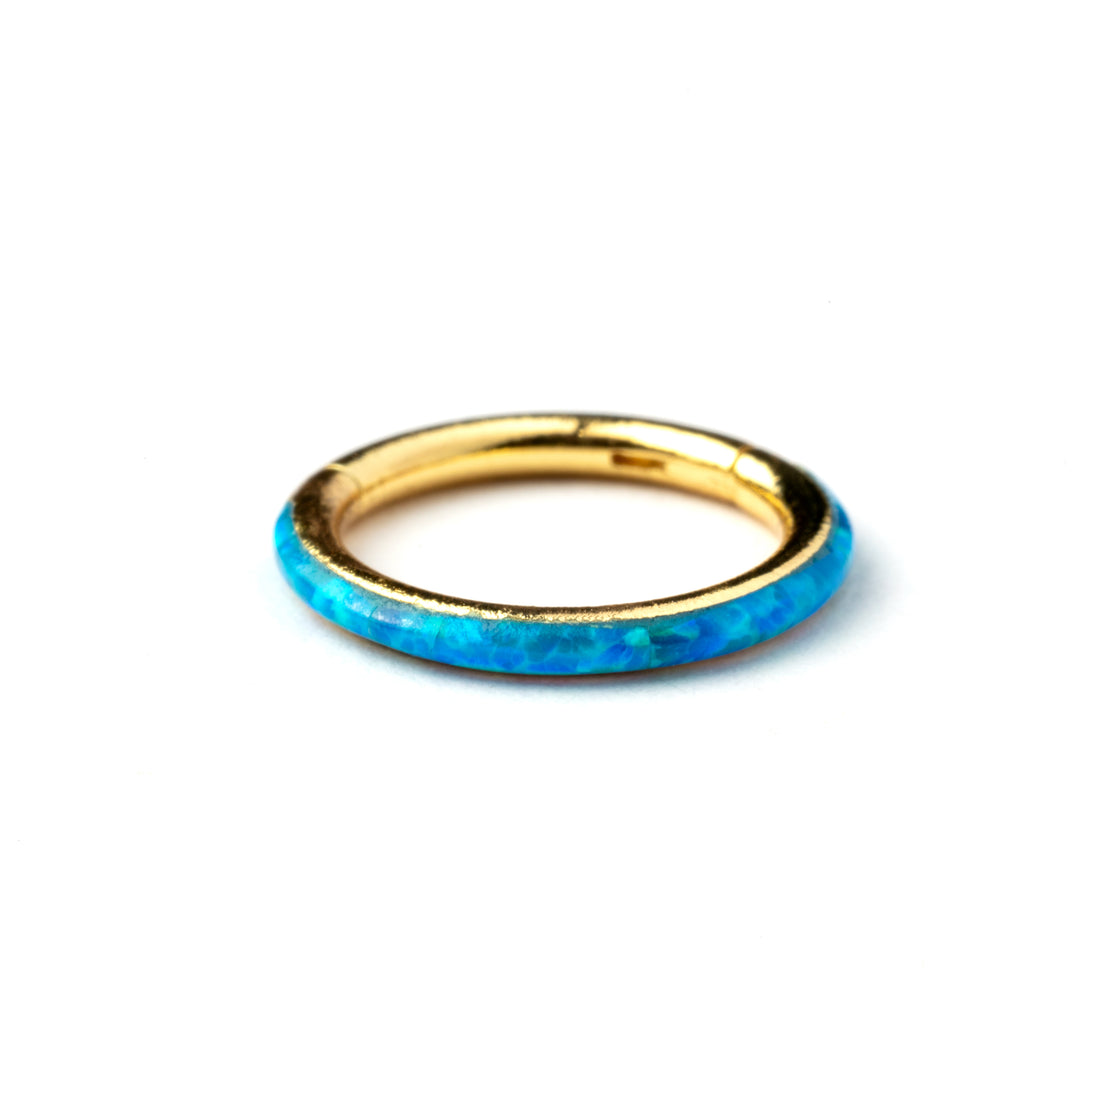 Gold surgical steel septum clicker ring with blue opal inlay side view